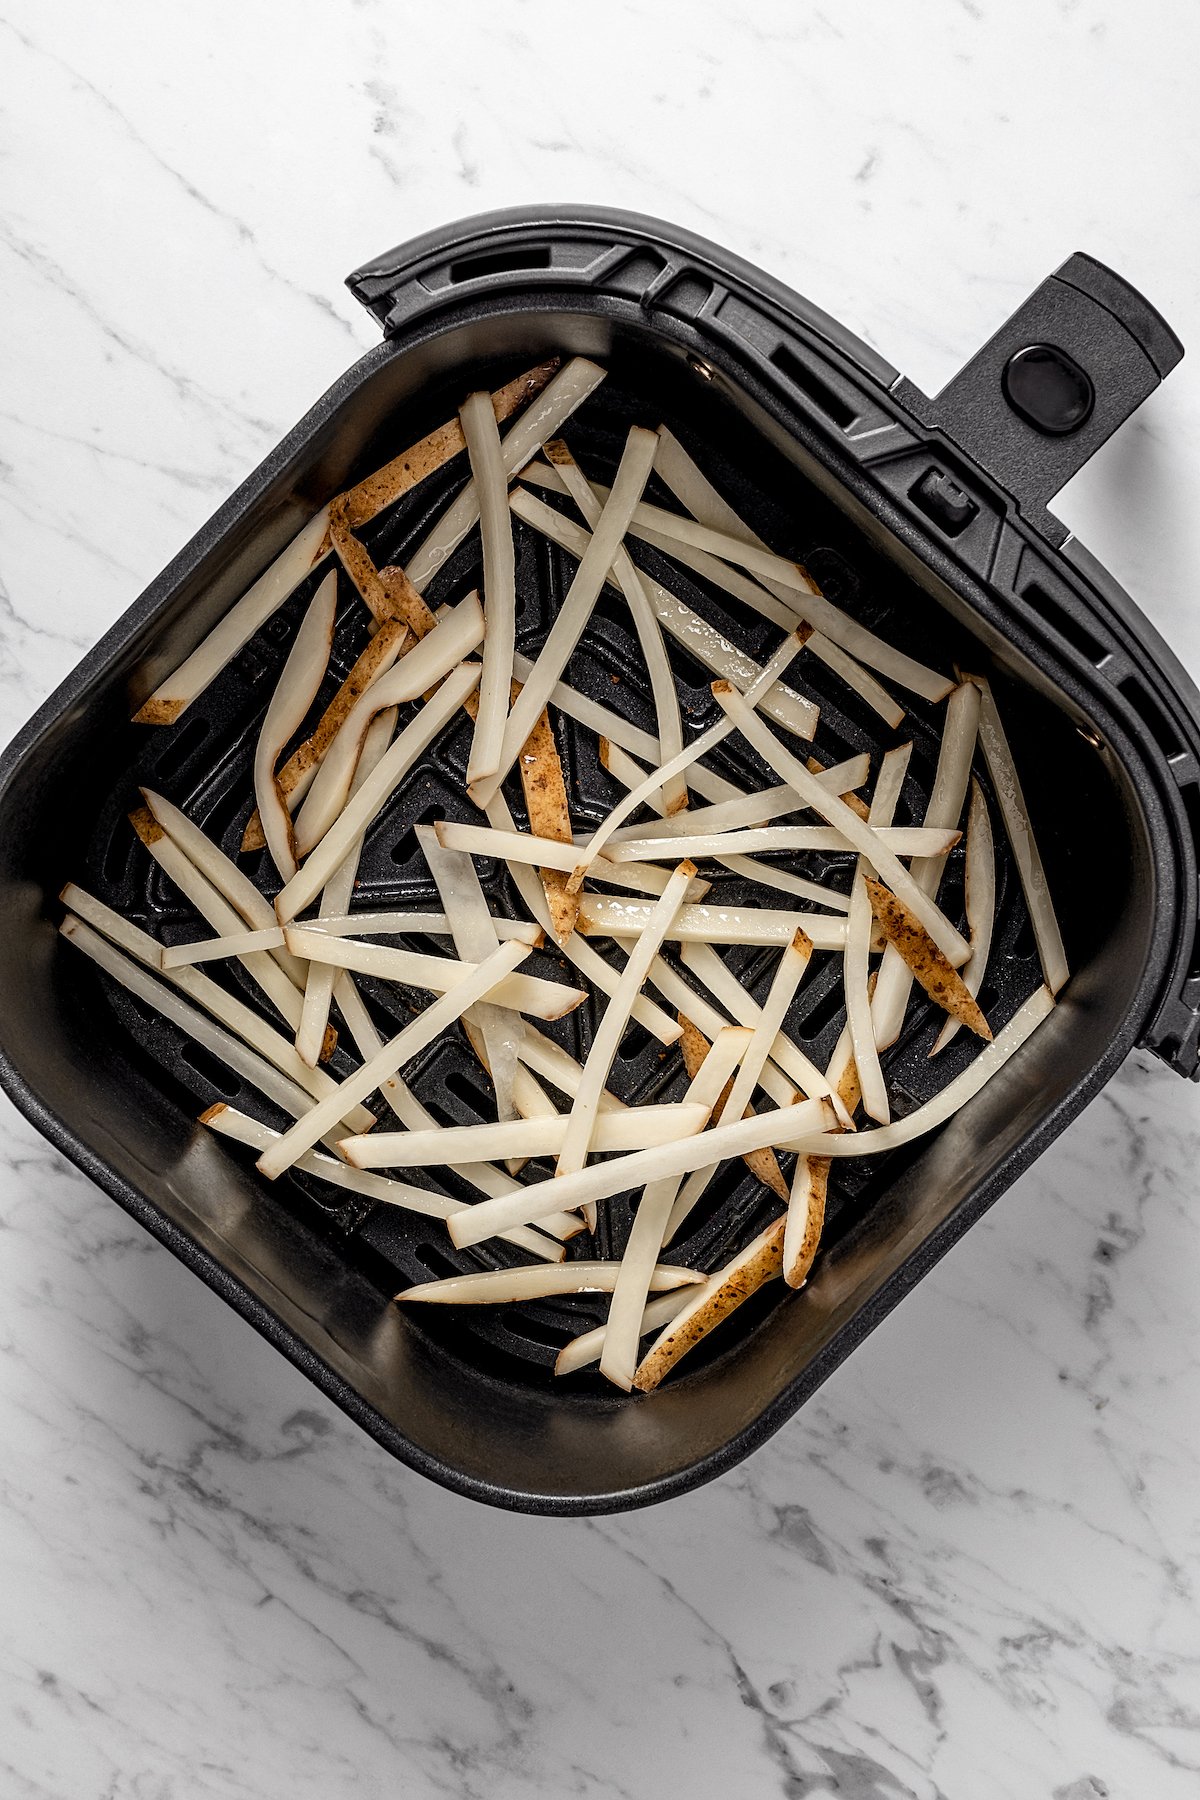 Overhead view of uncooked shoestring fries in air fryer